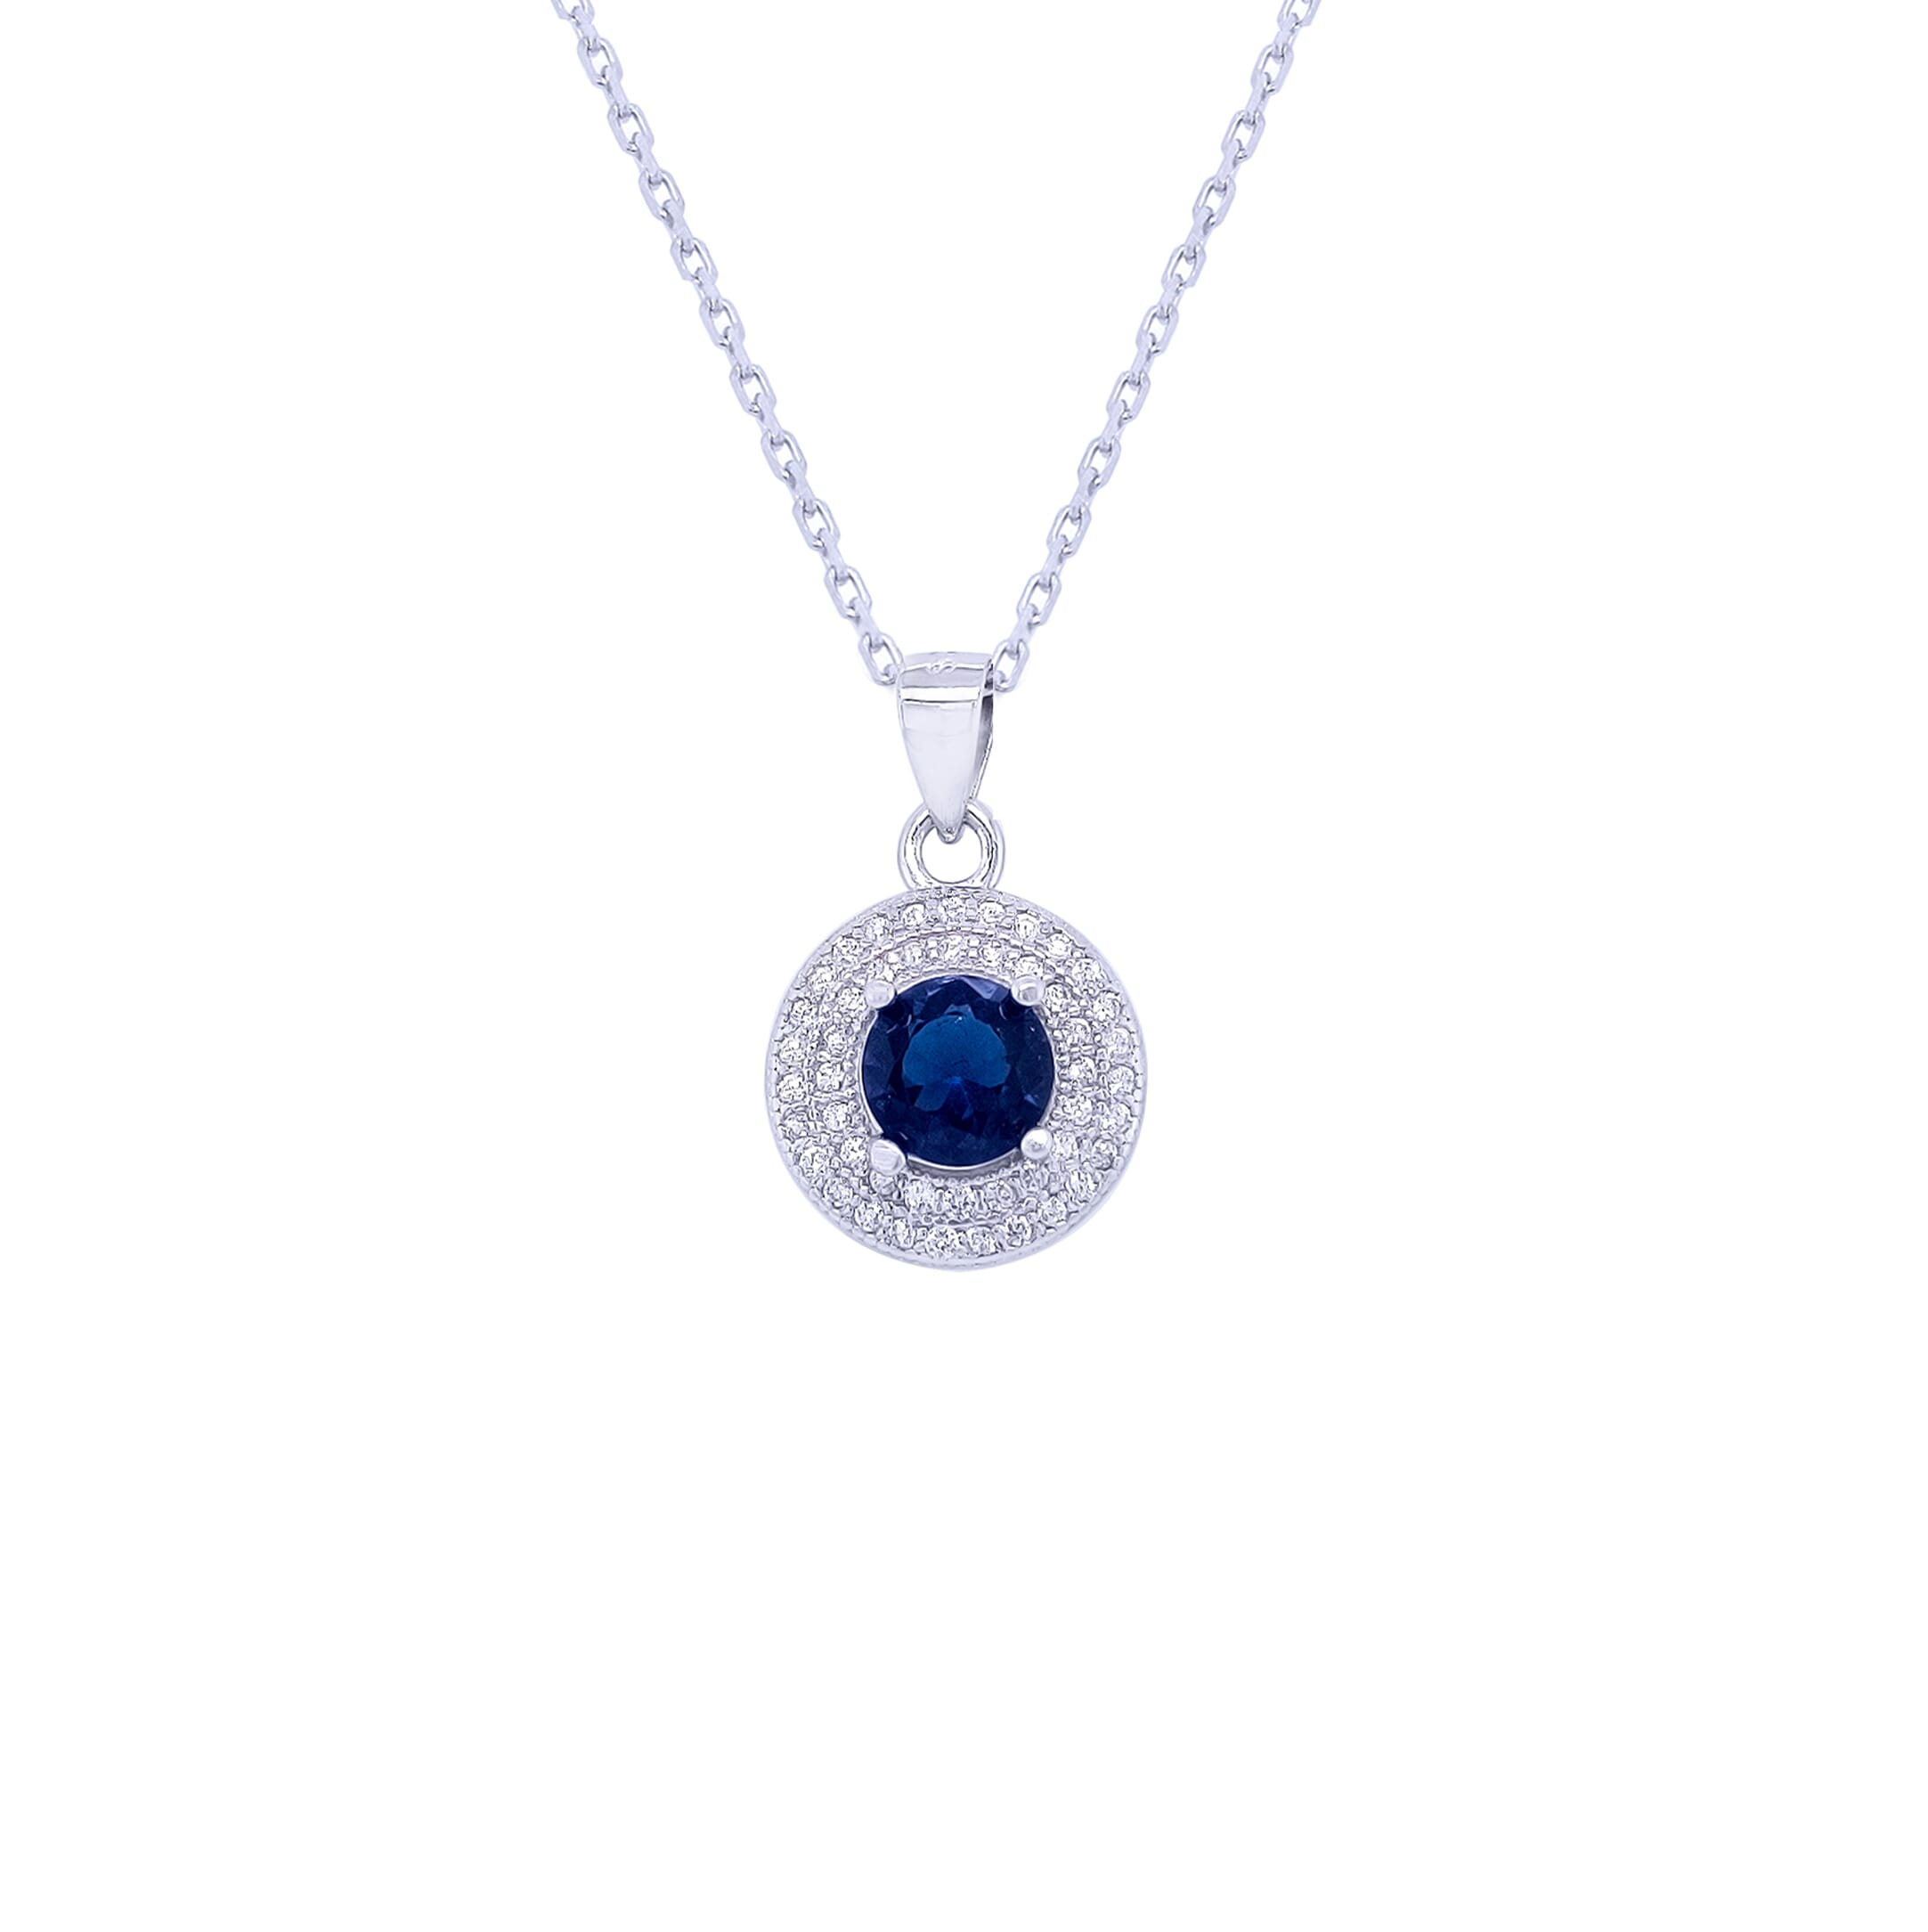 Asfour 925 Sterling Silver Necklace With Blue Round Pendant